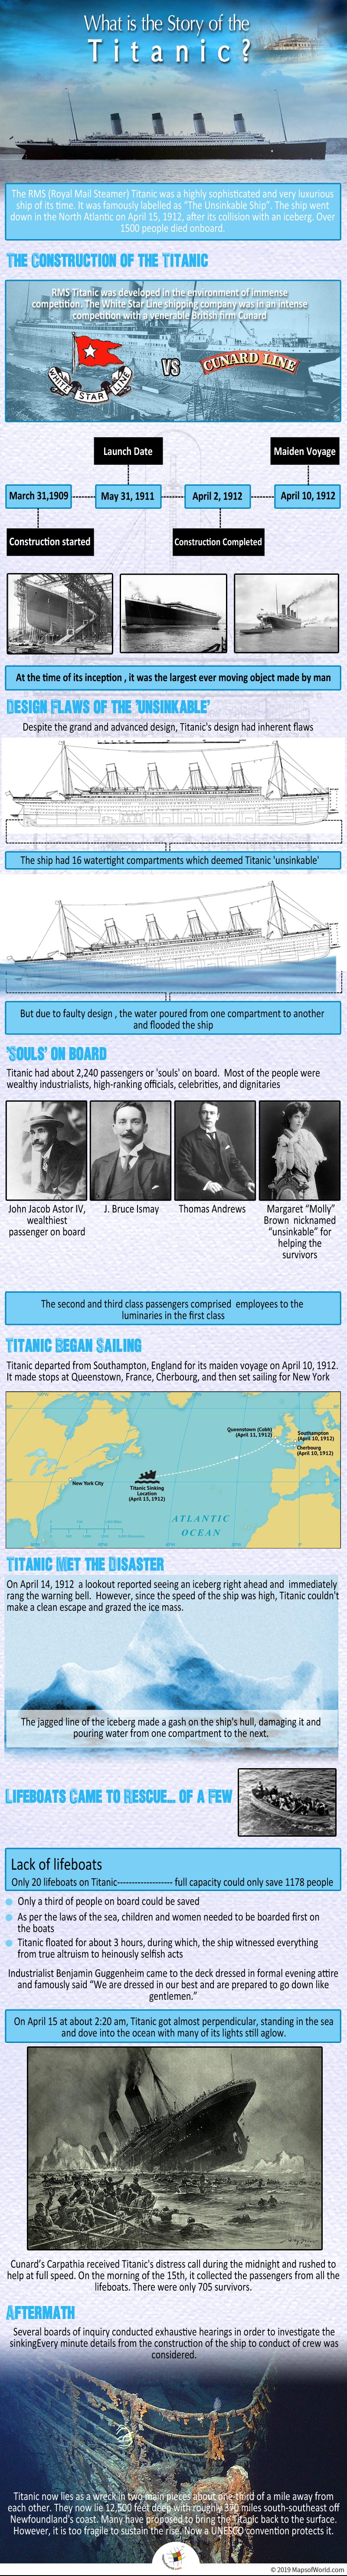 Infographic Shows The Story of Titanic